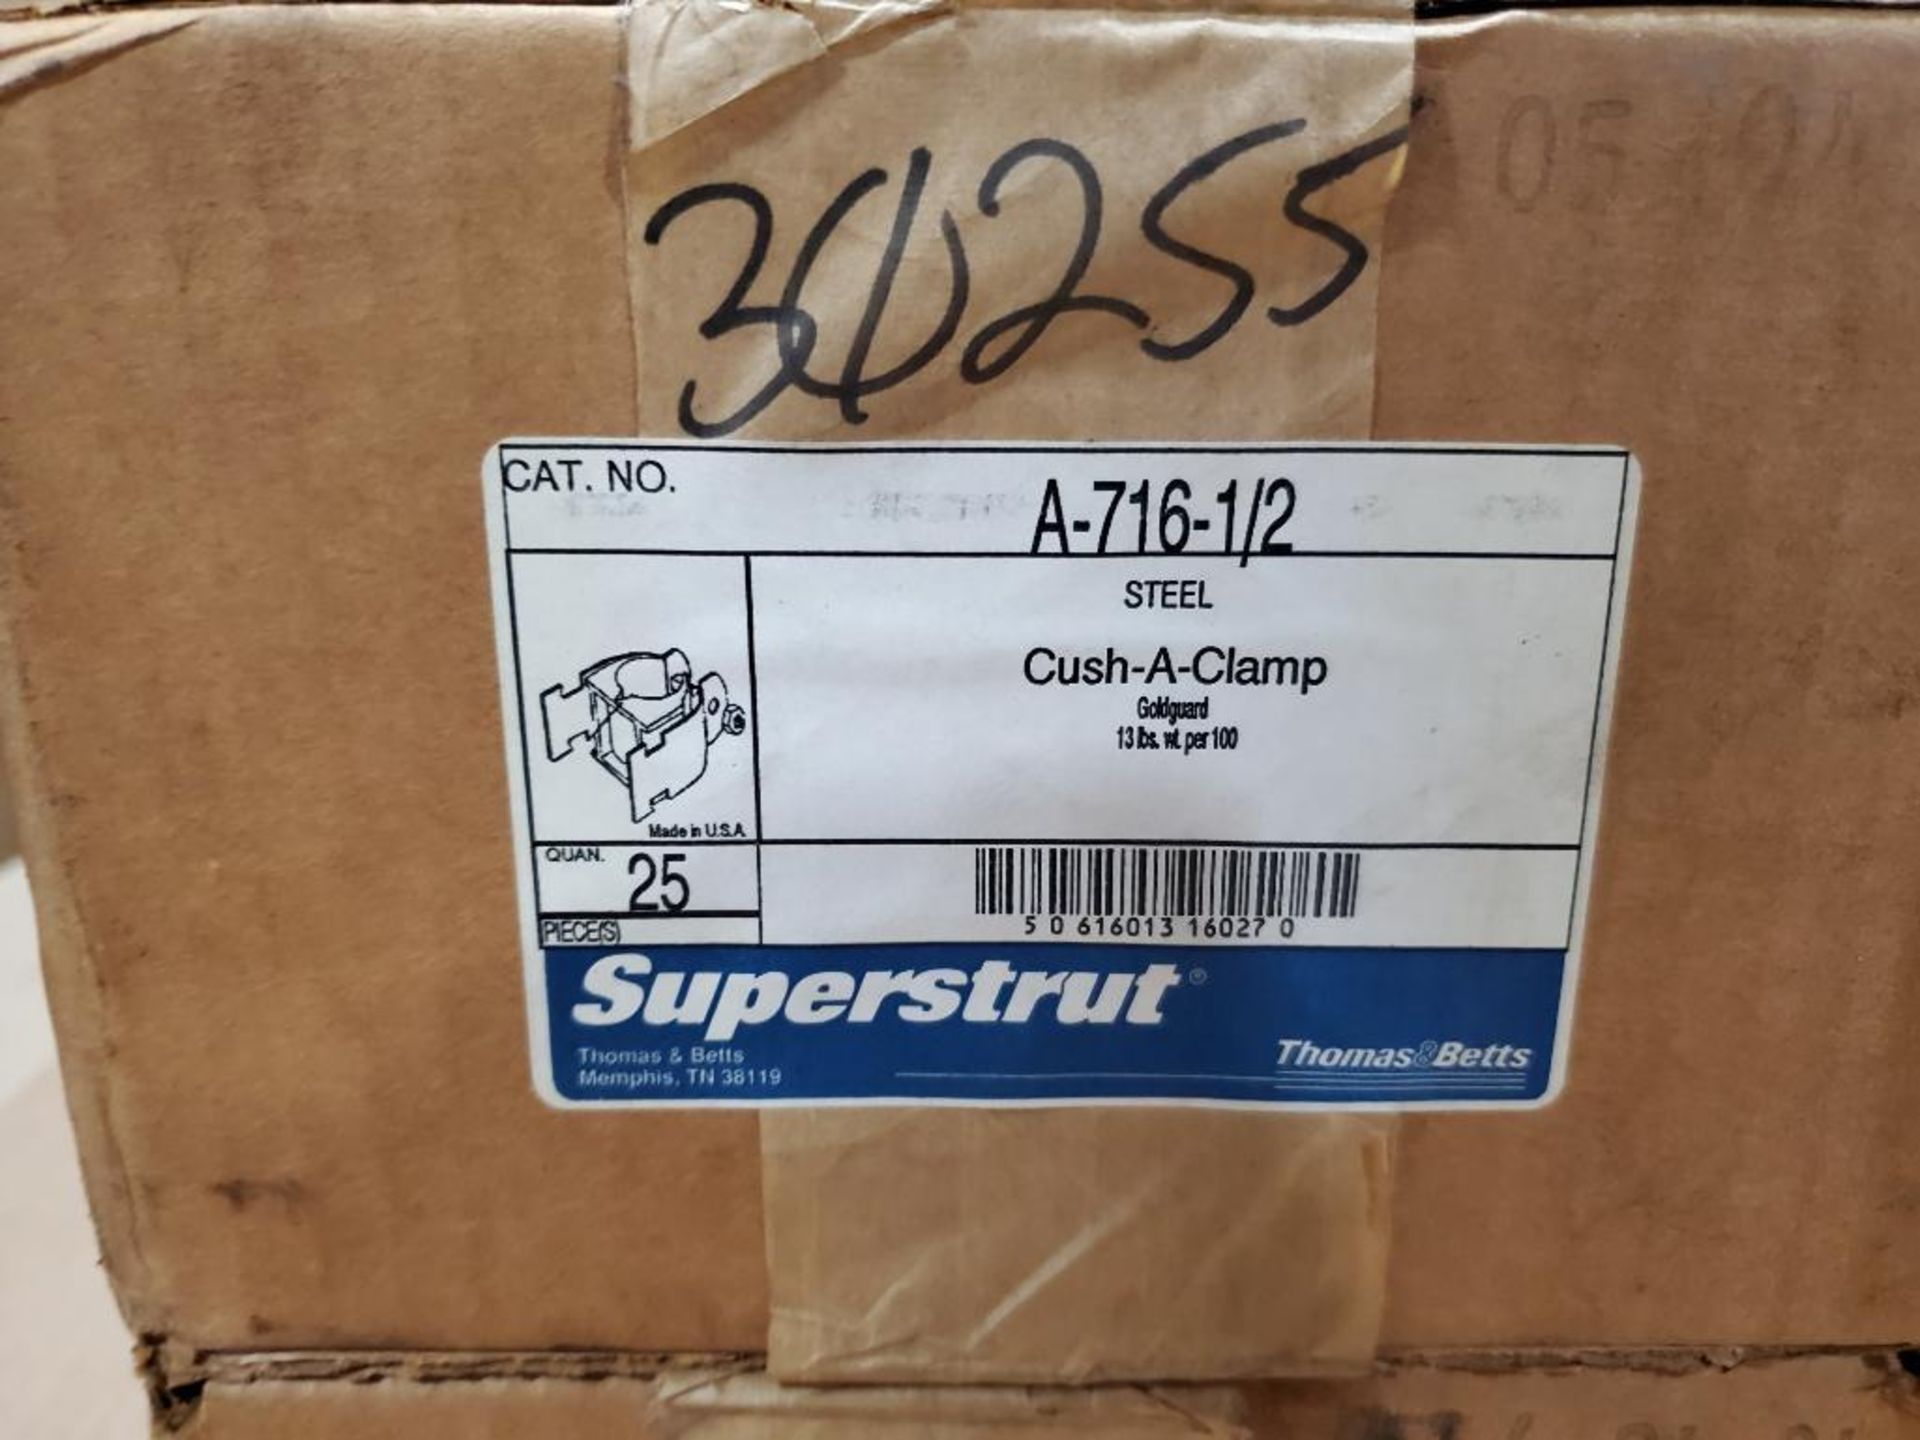 Qty 100 - Superstrut cush-a-clamp. Catalog A-716-1/2. (4 boxes of 25) - Image 2 of 3